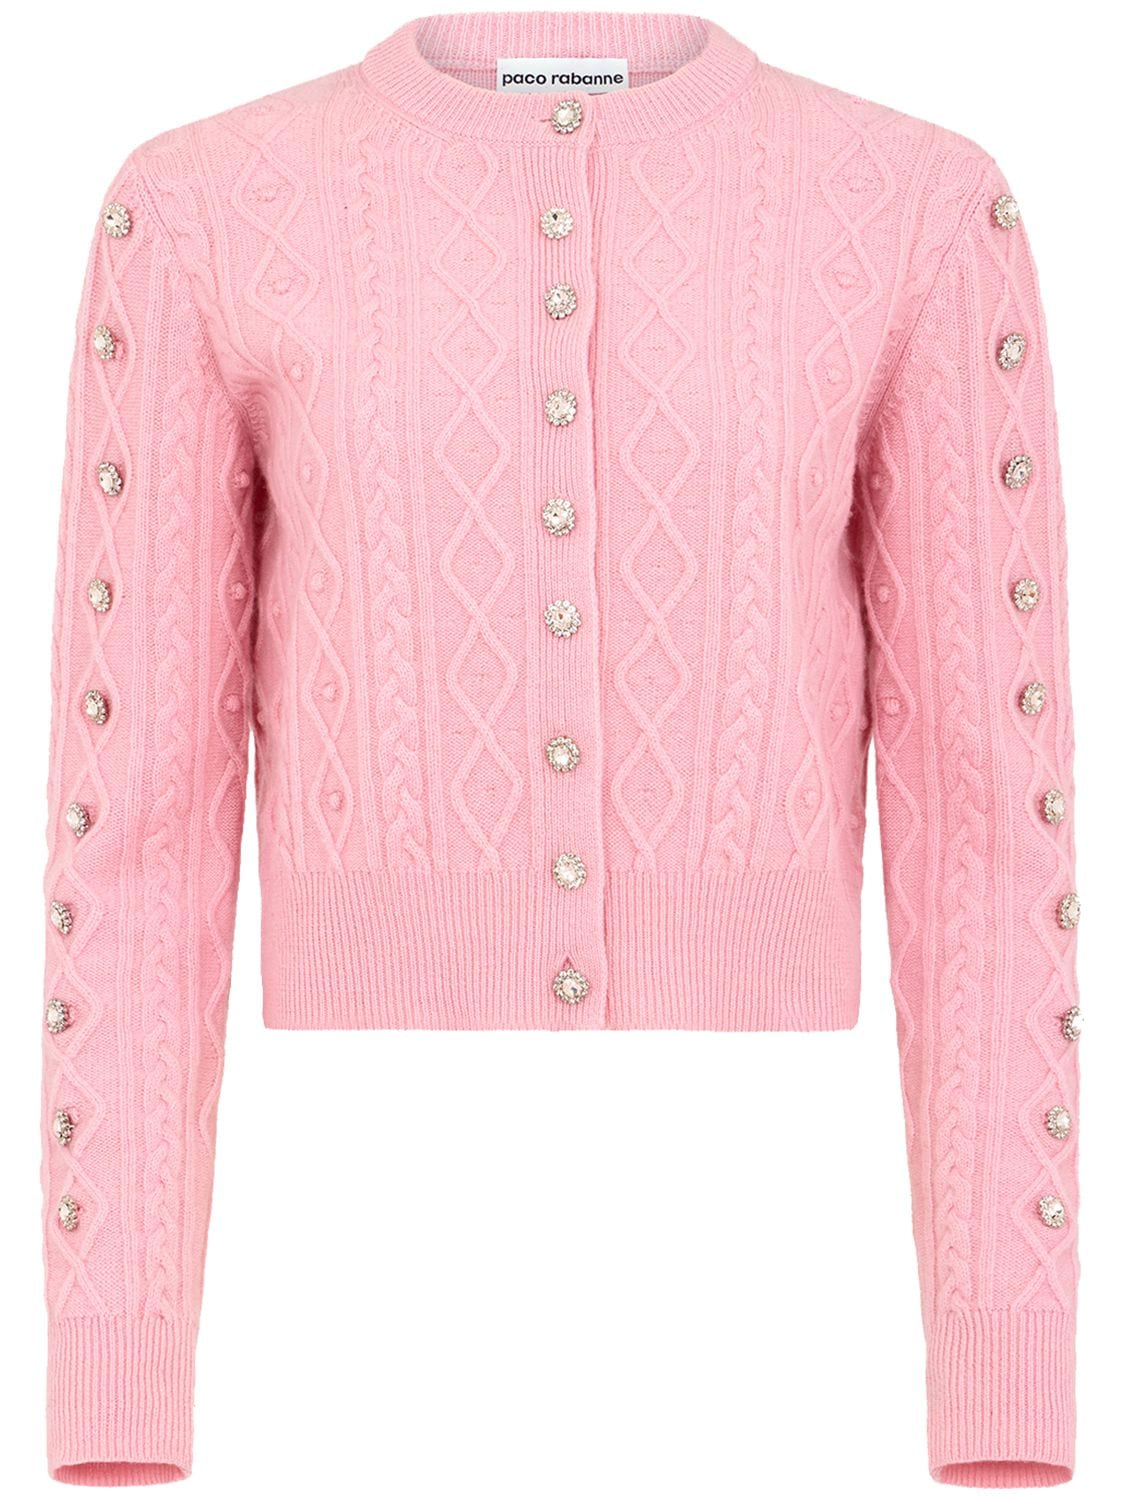 Paco Rabanne Wool & Cashmere Knit Cardigan W/crystals In Pink